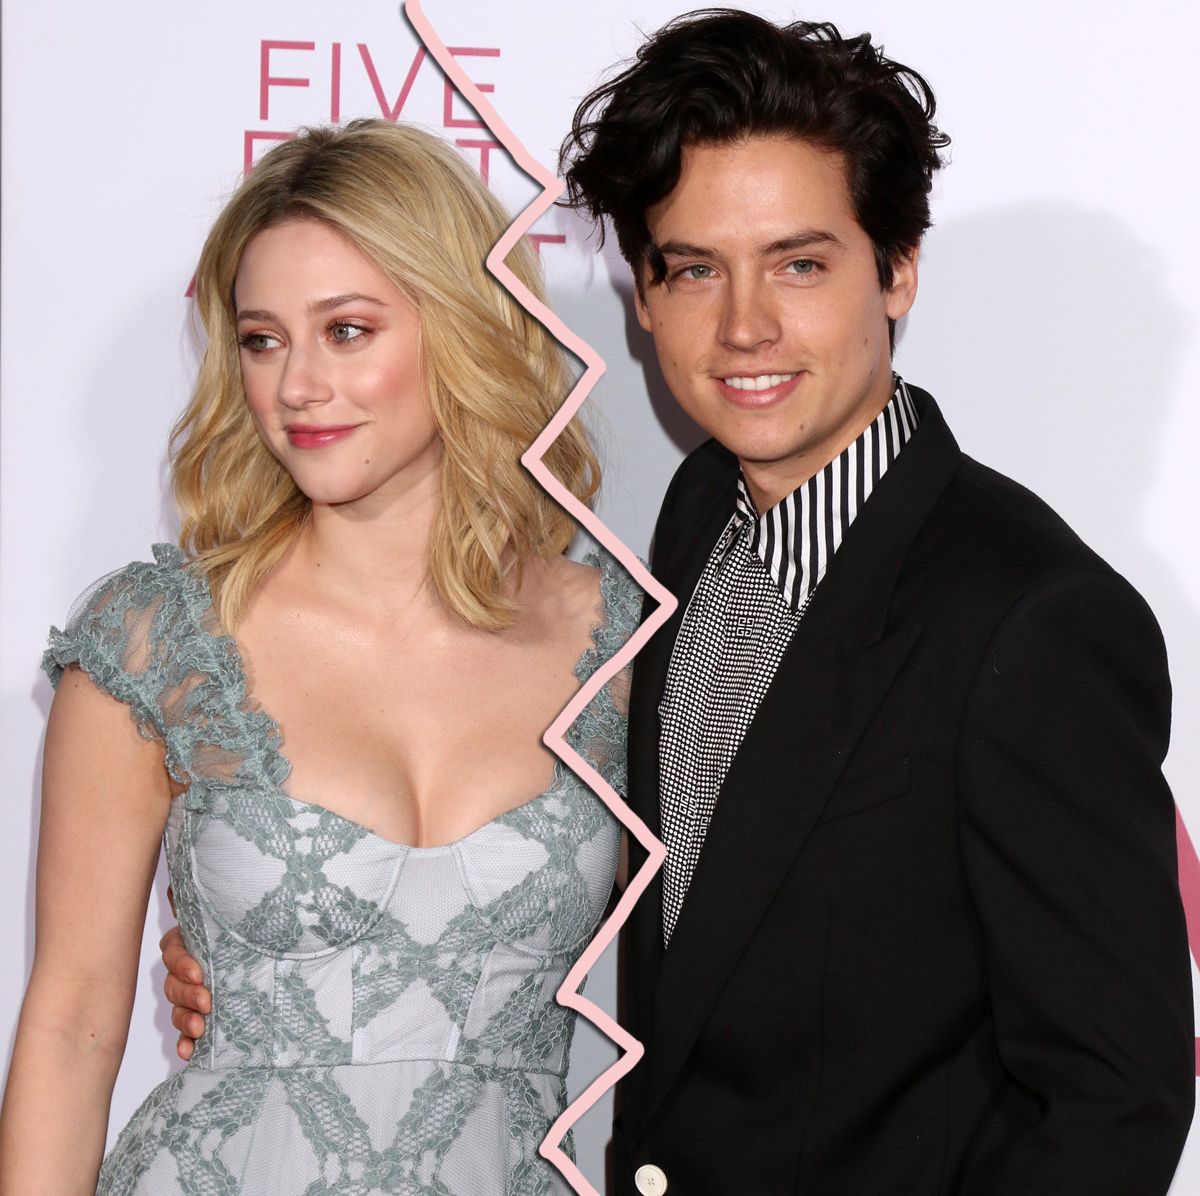 Lili Reinhart And Cole Sprouse Split Up Ending Three Year Relationship